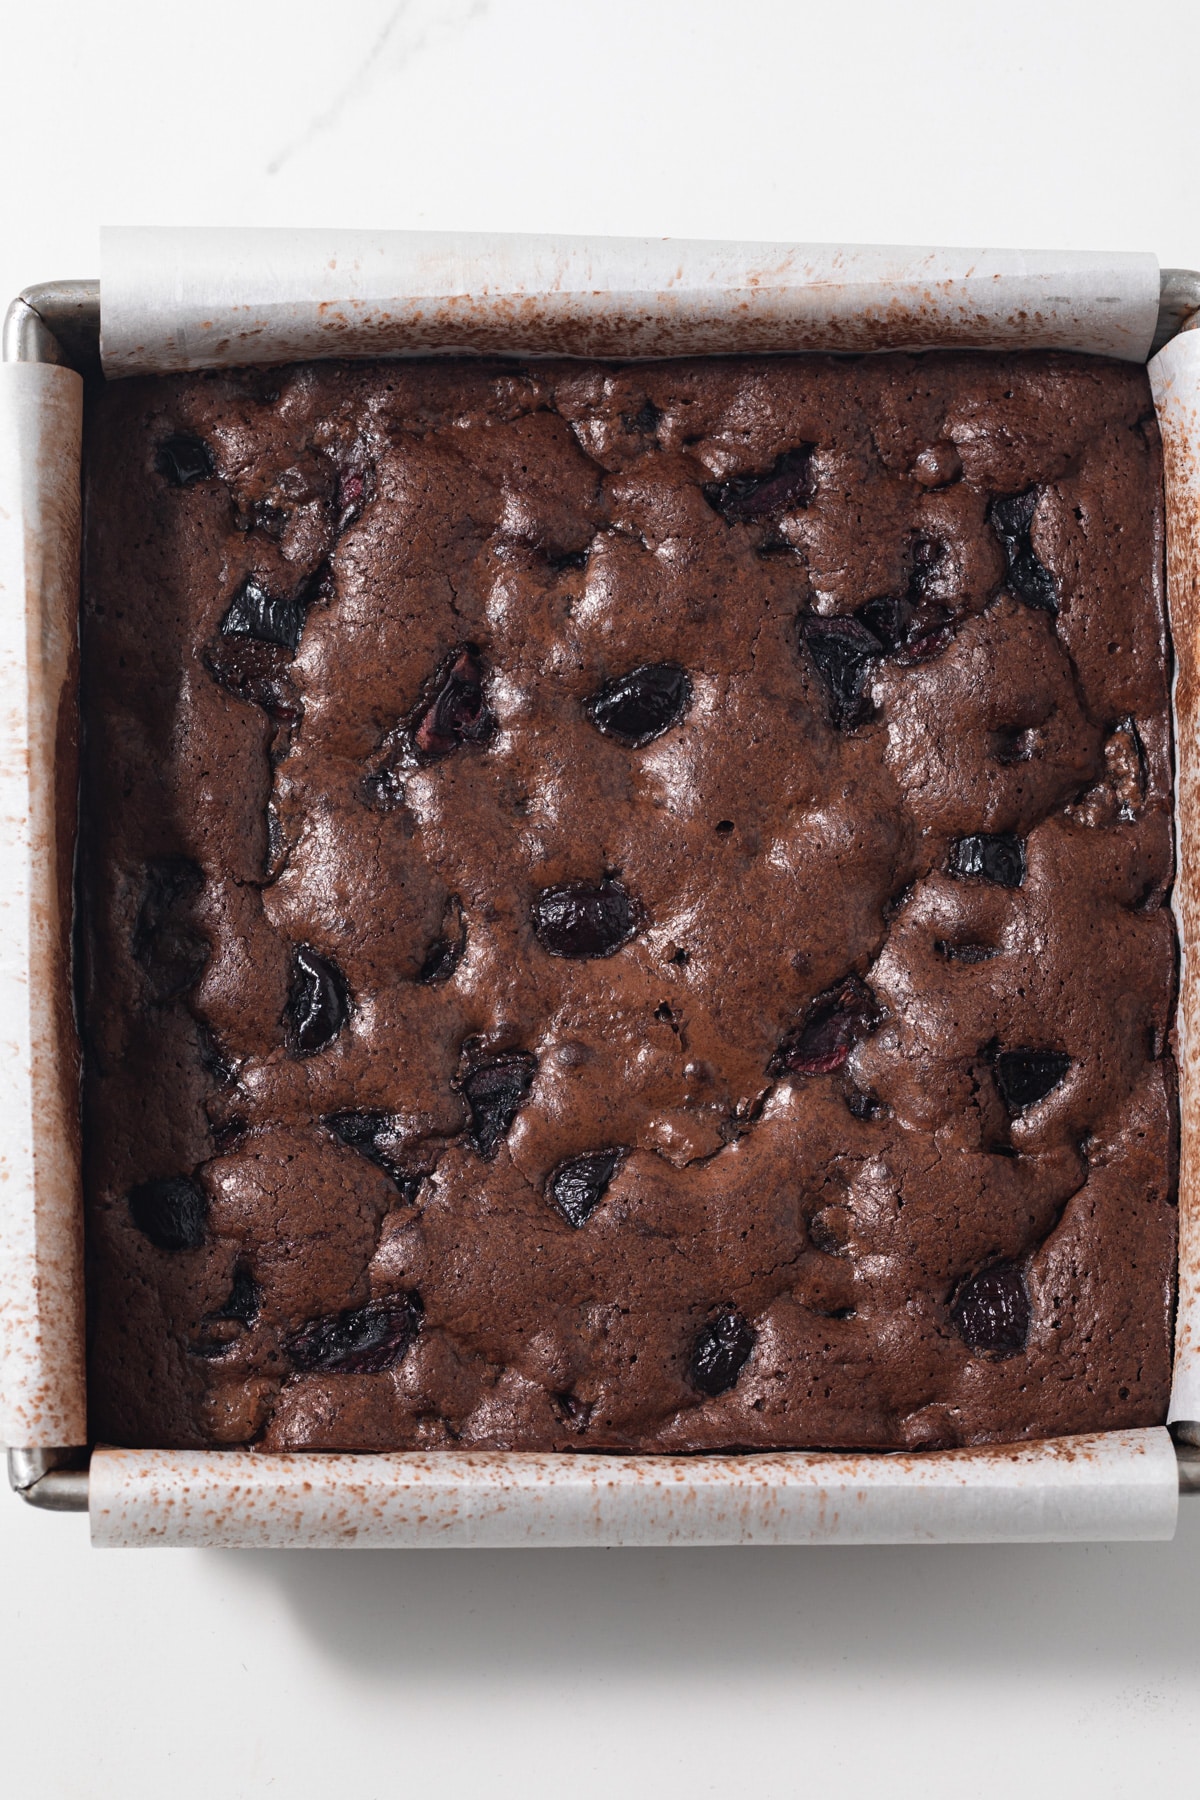 Cherry chocolate brownies in a square baking pan.